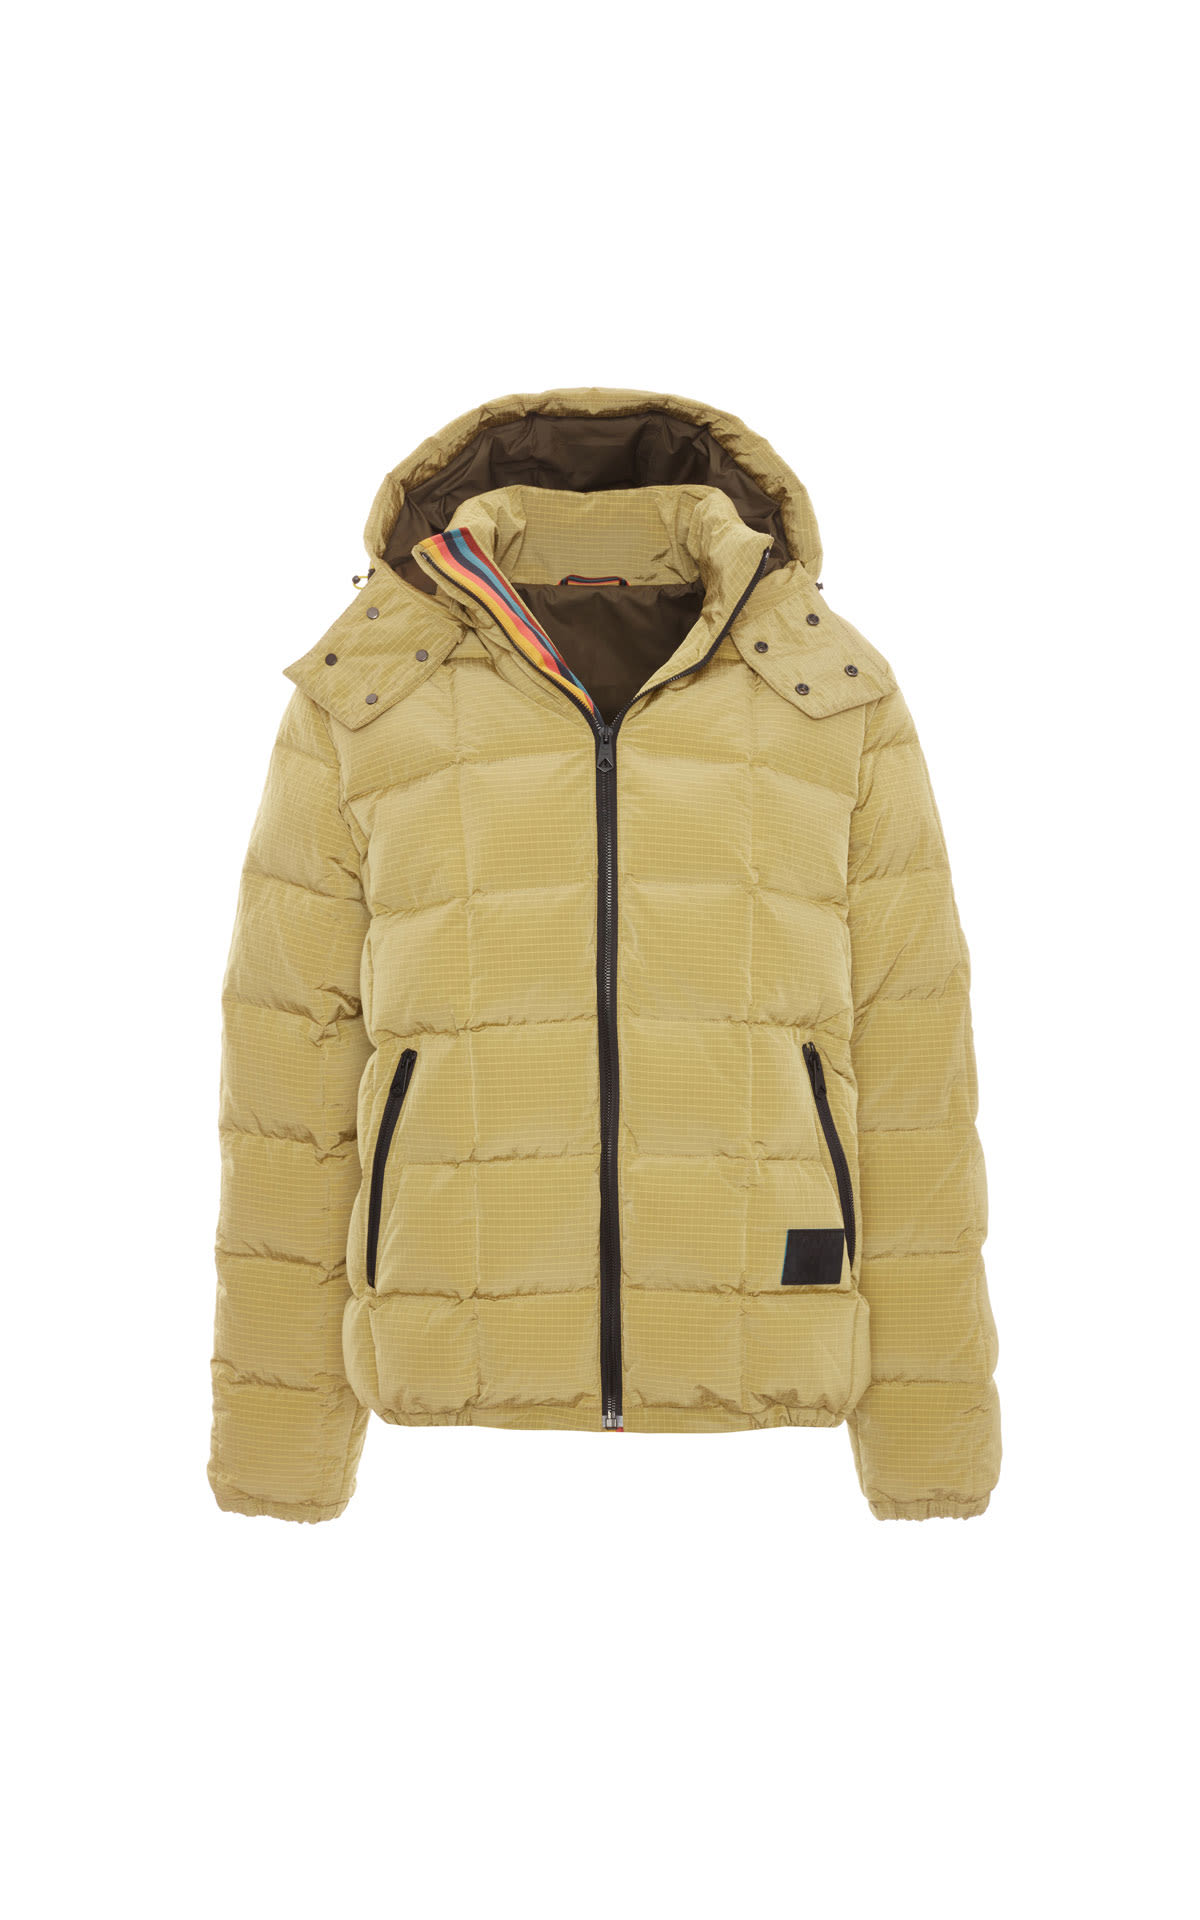 Paul Smith Yellow puffer from Bicester Village